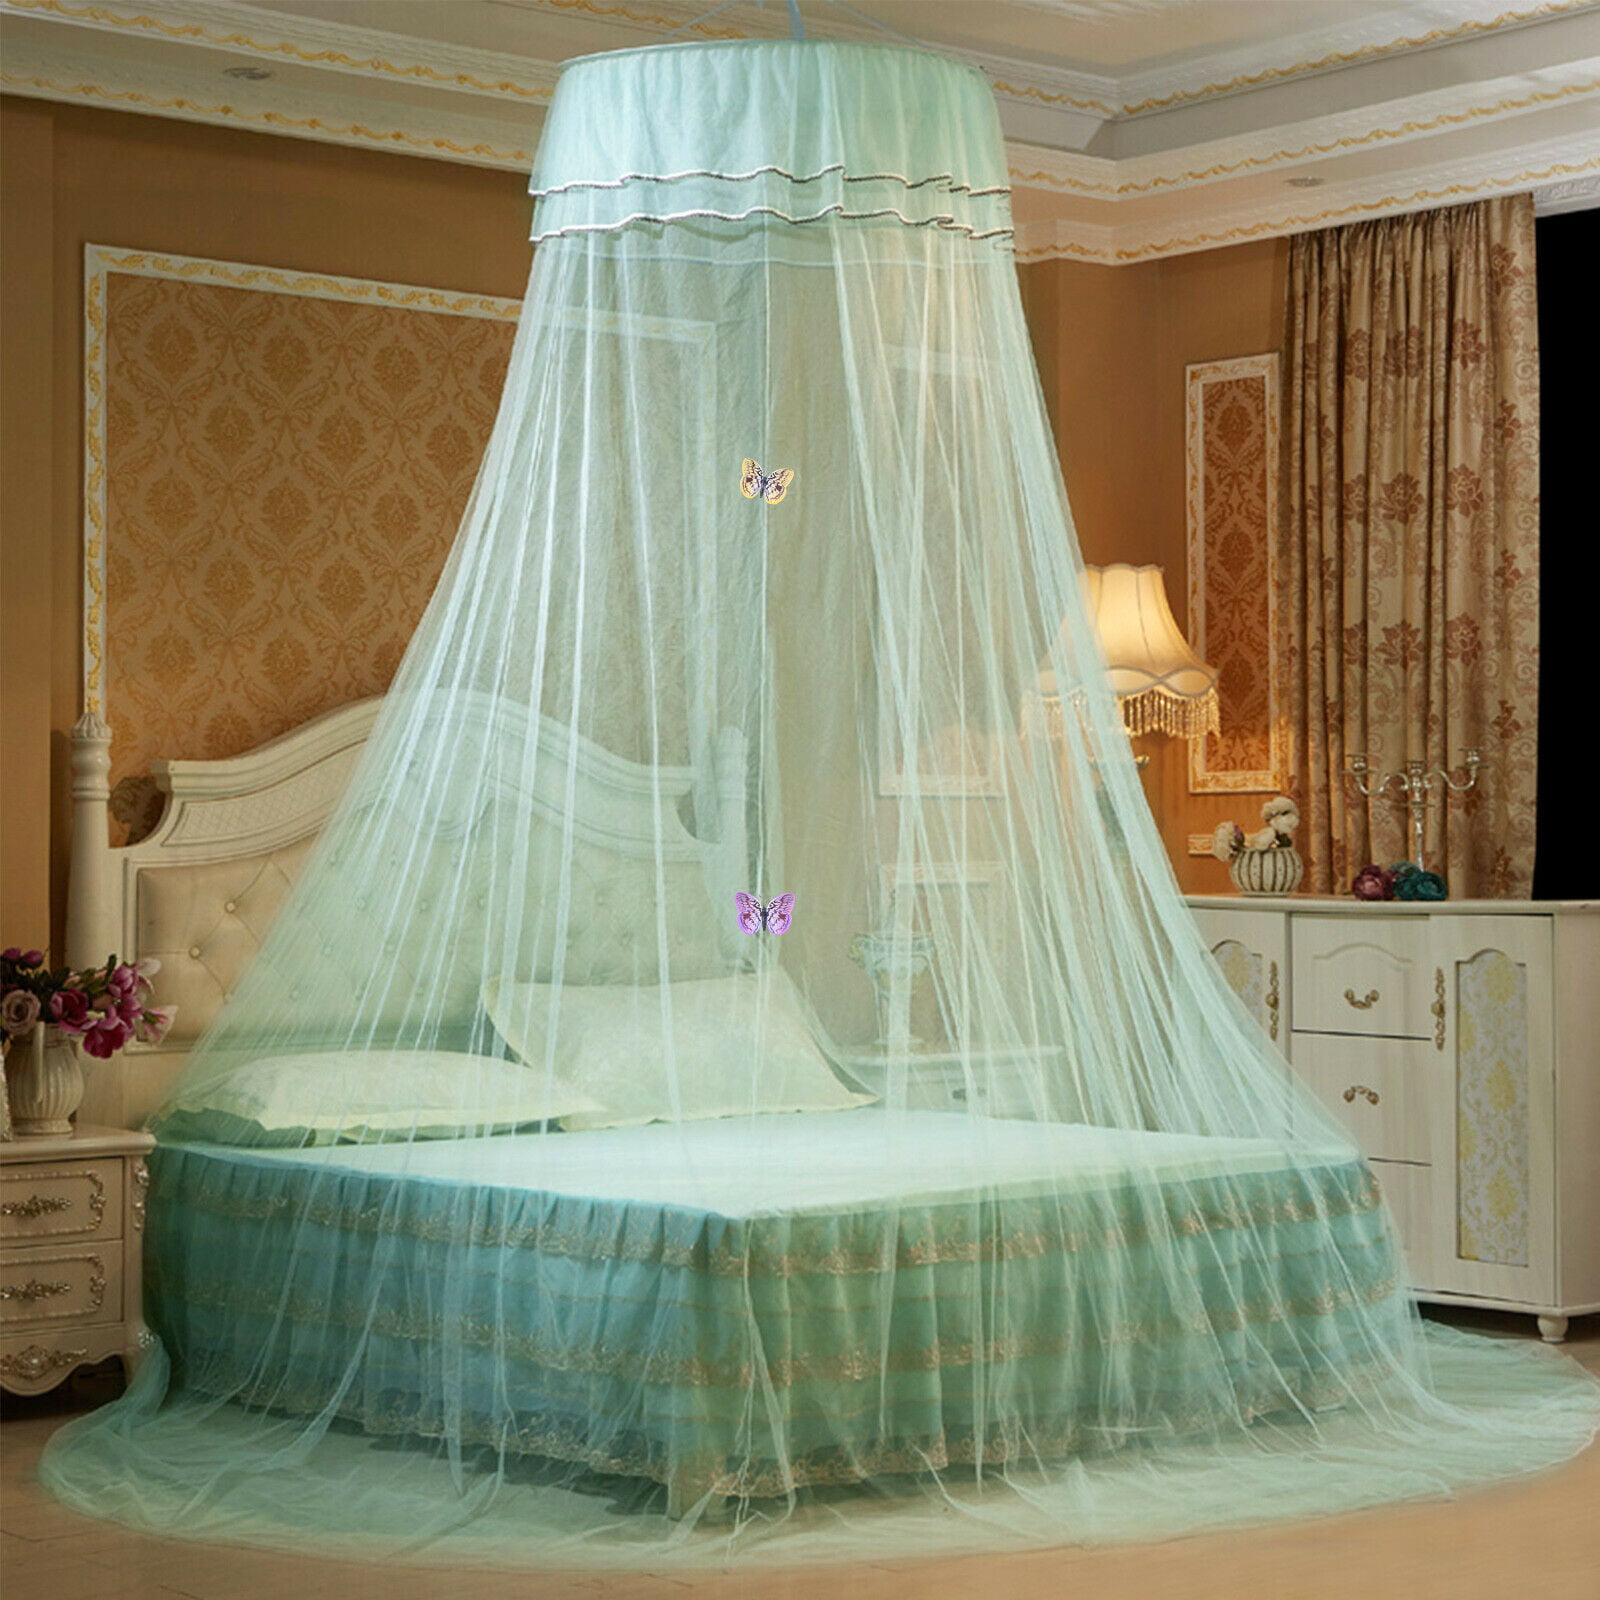 Bed Mosquito Netting Mesh Lace Canopy Princess Round Dome Bedding Net Foldable 